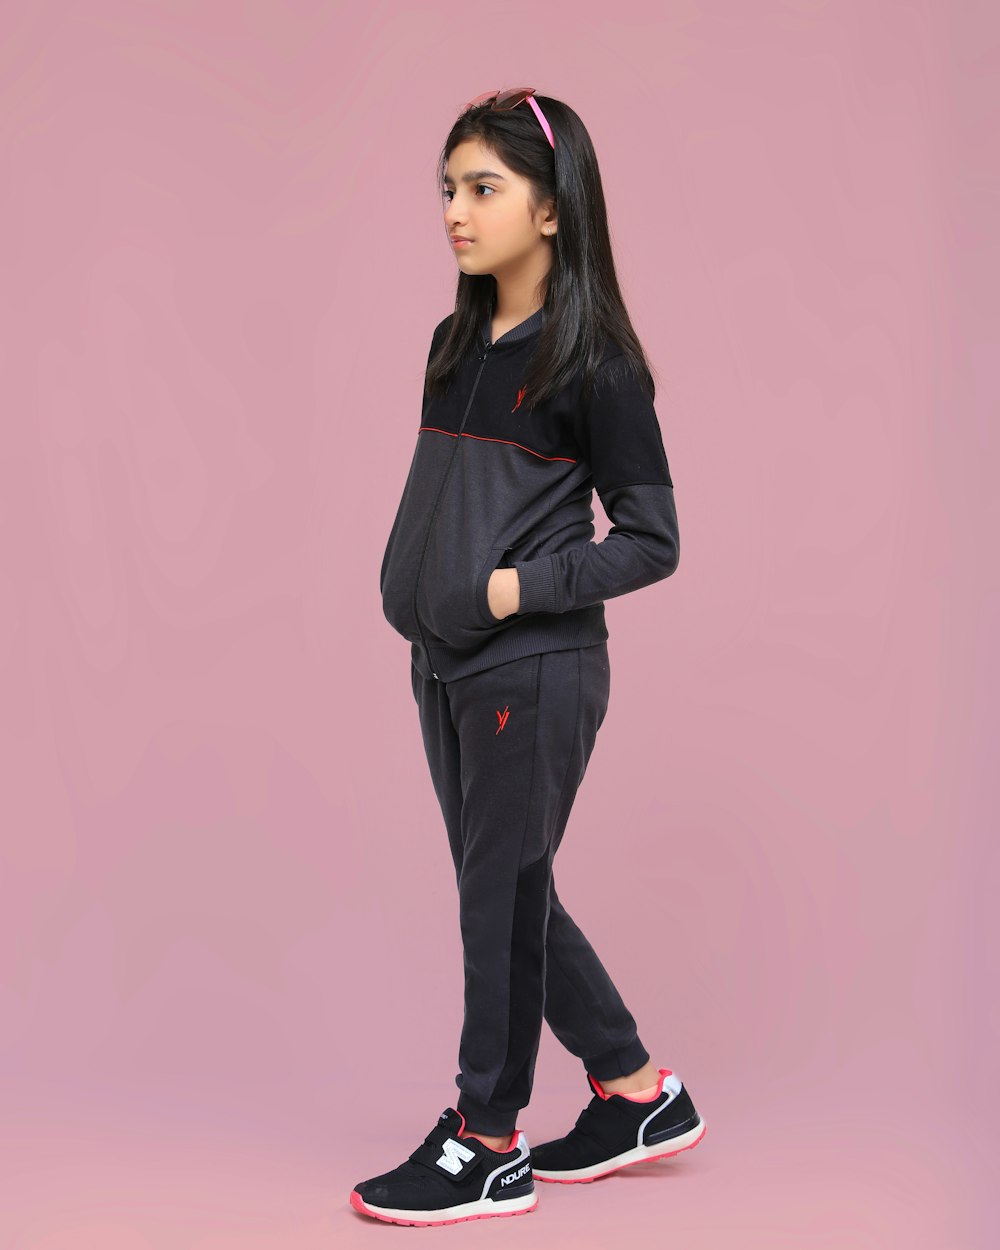 a young girl wearing a black sweatshirt and sweatpants